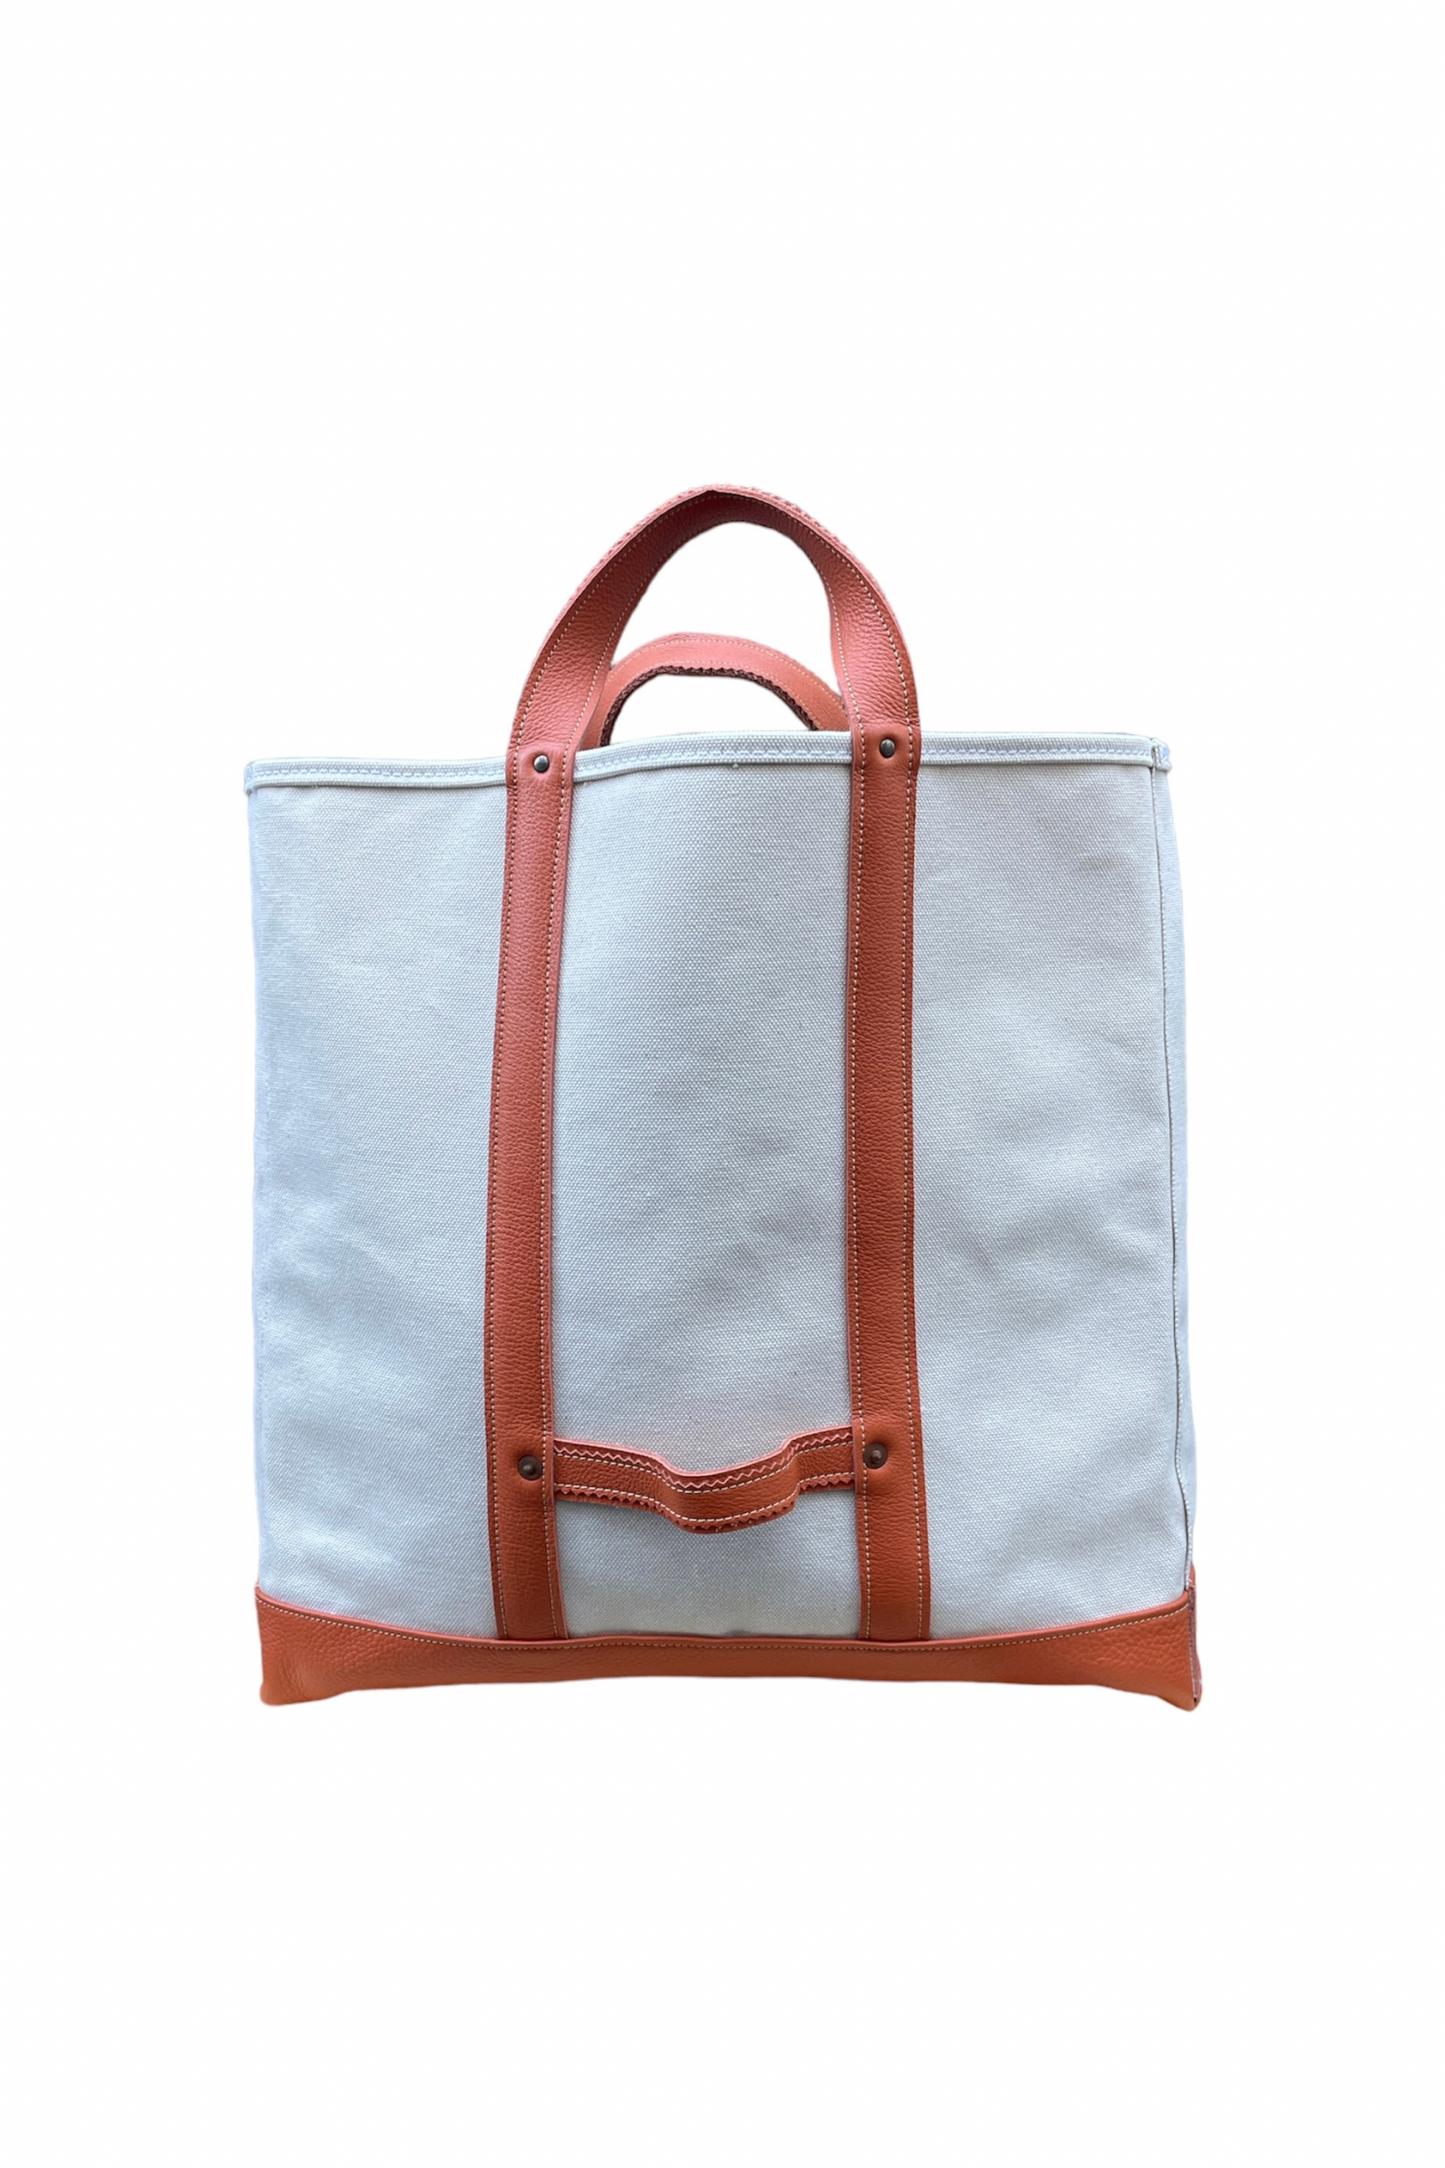 [Narukiro] Canvas Bag with Leather